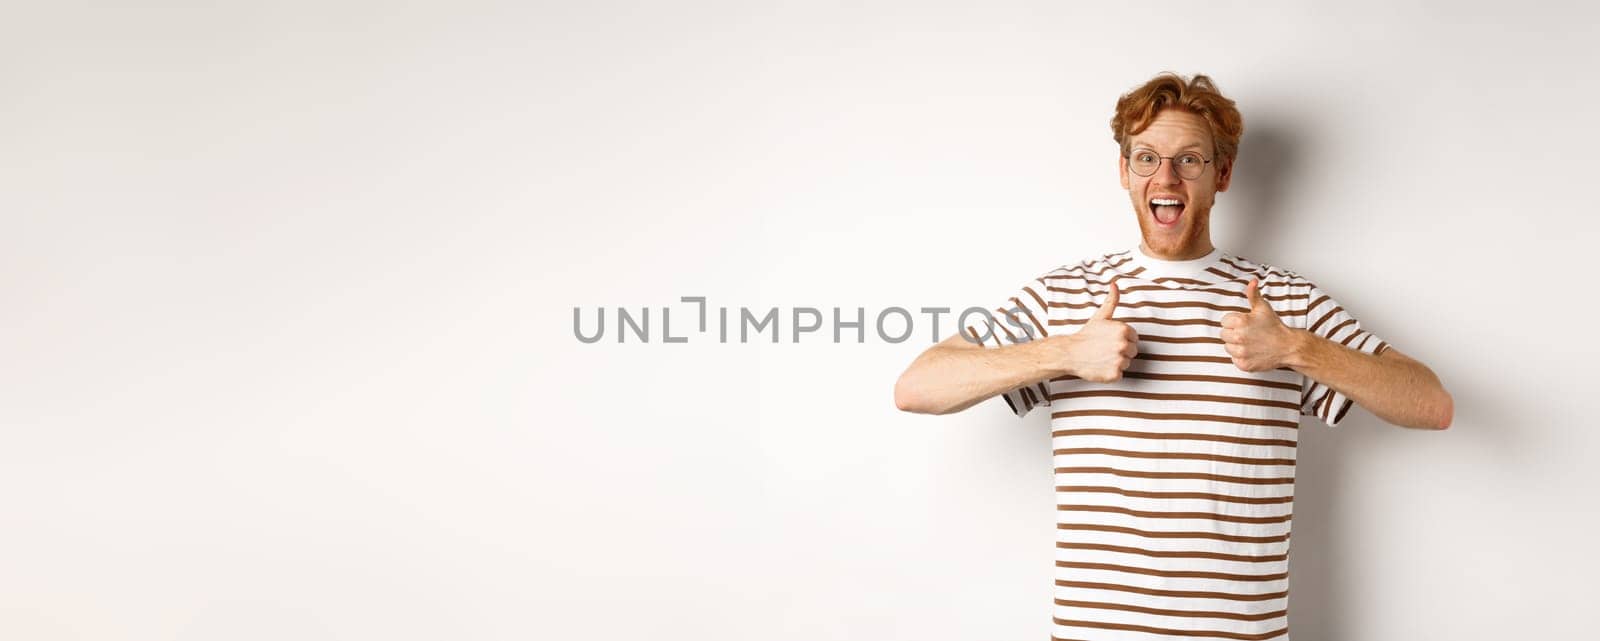 Young amazed man in red hair checking out something awesome, saying yes and showing thumbs-up, standing over white background.